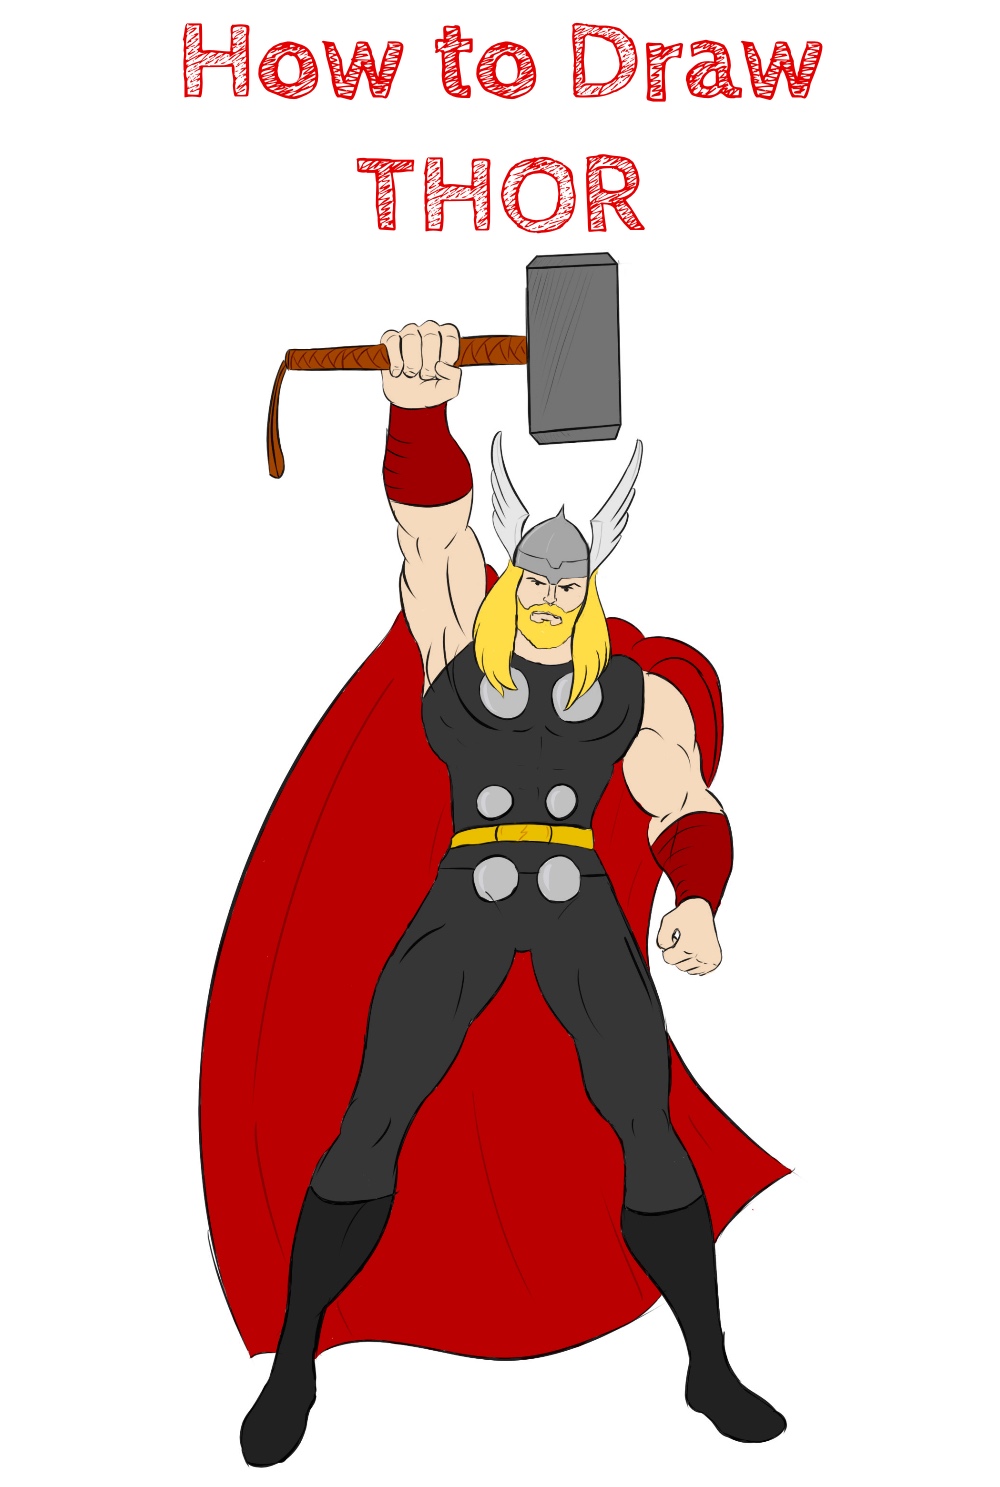 How to Draw Thor from Marvel